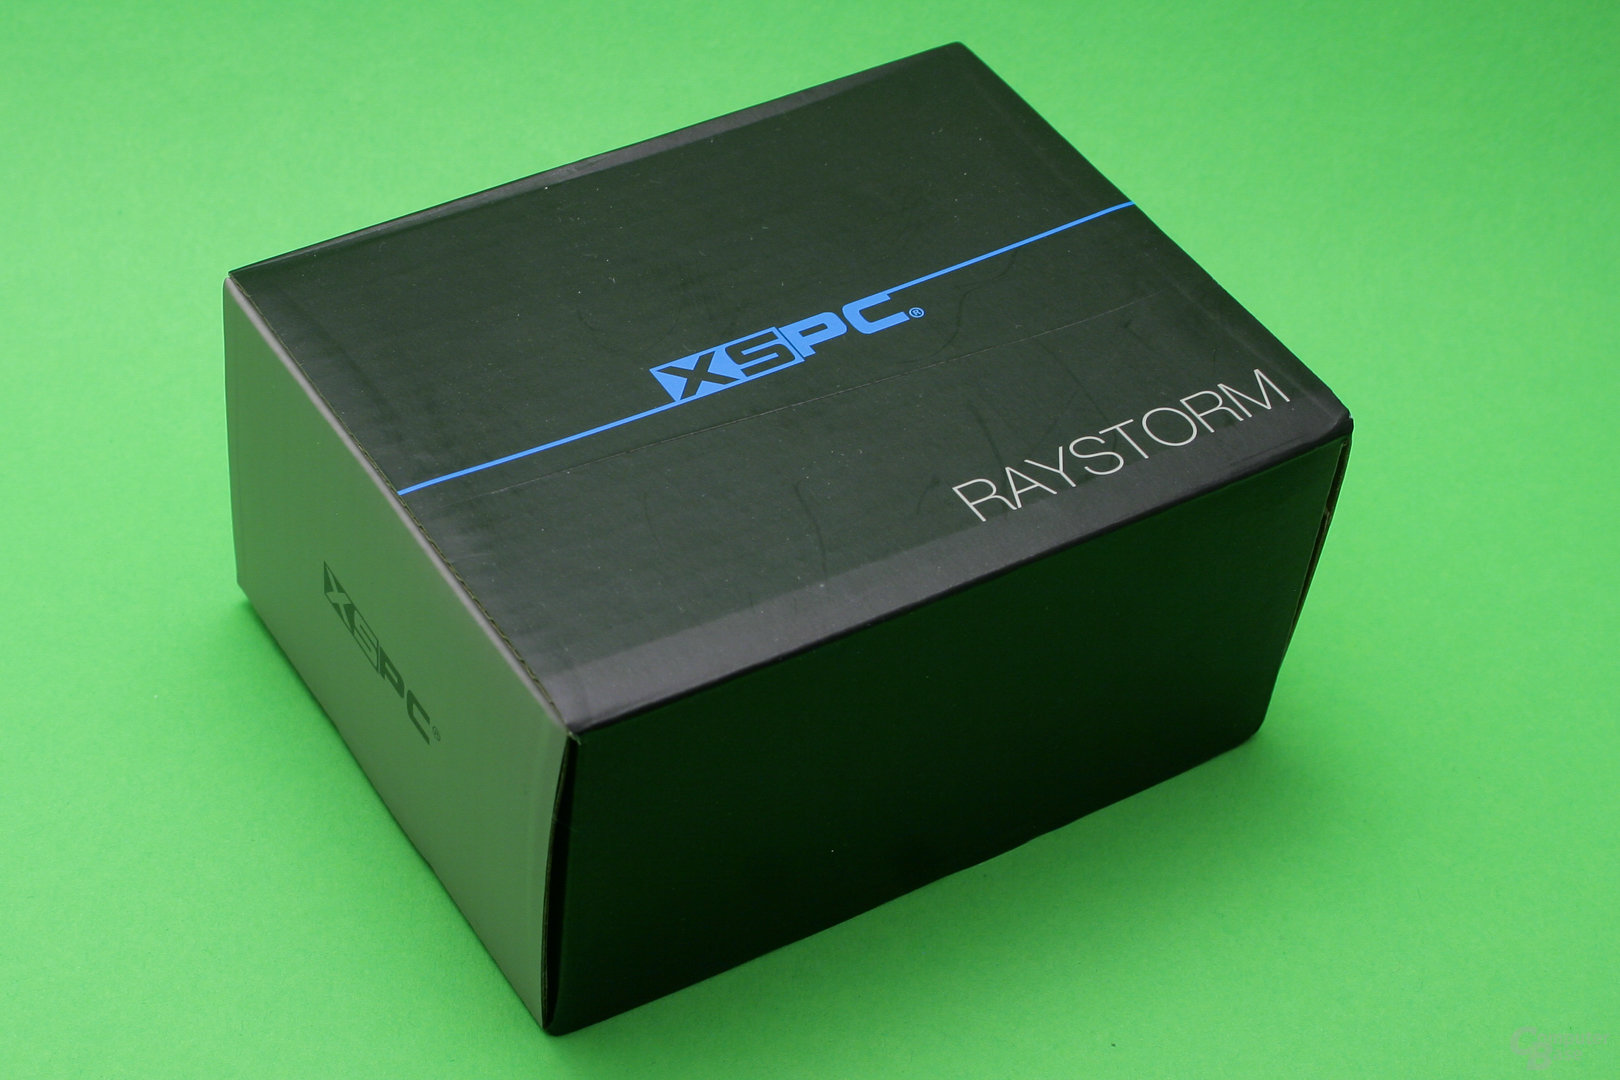 XSPC Raystorm Pro: Verpackung